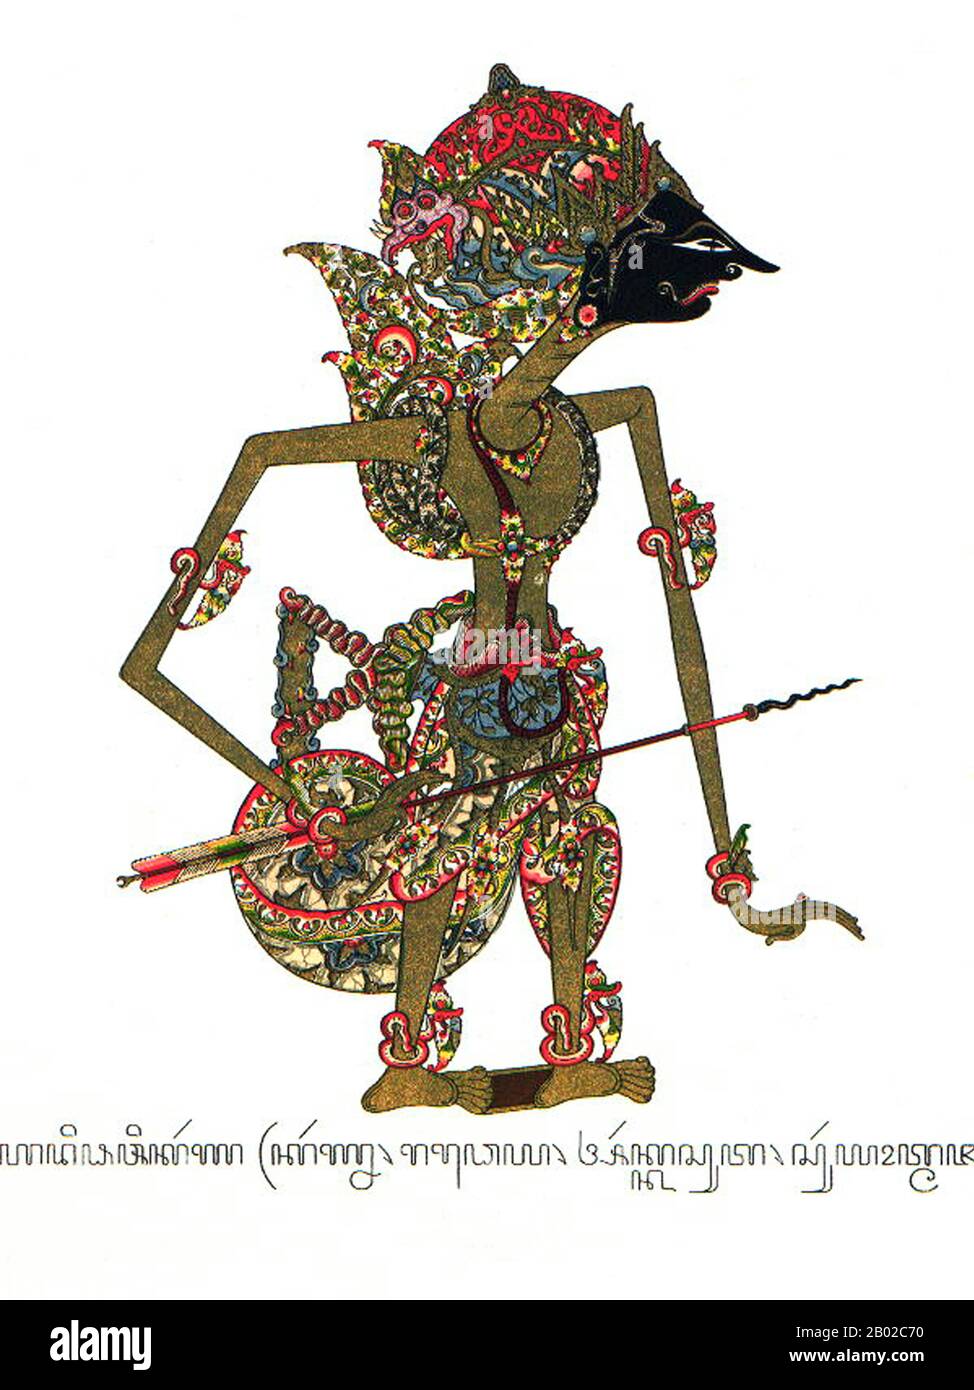 Wayang is a Javanese word for particular kinds of theatre (literally 'shadow'). When the term is used to refer to kinds of puppet theatre, sometimes the puppet itself is referred to as wayang. Performances of shadow puppet theatre are accompanied by gamelan in Java.  UNESCO designated Wayang Kulit, a shadow puppet theatre and the best known of the Indonesian wayang, as a Masterpiece of Oral and Intangible Heritage of Humanity on 7 November 2003. Stock Photo